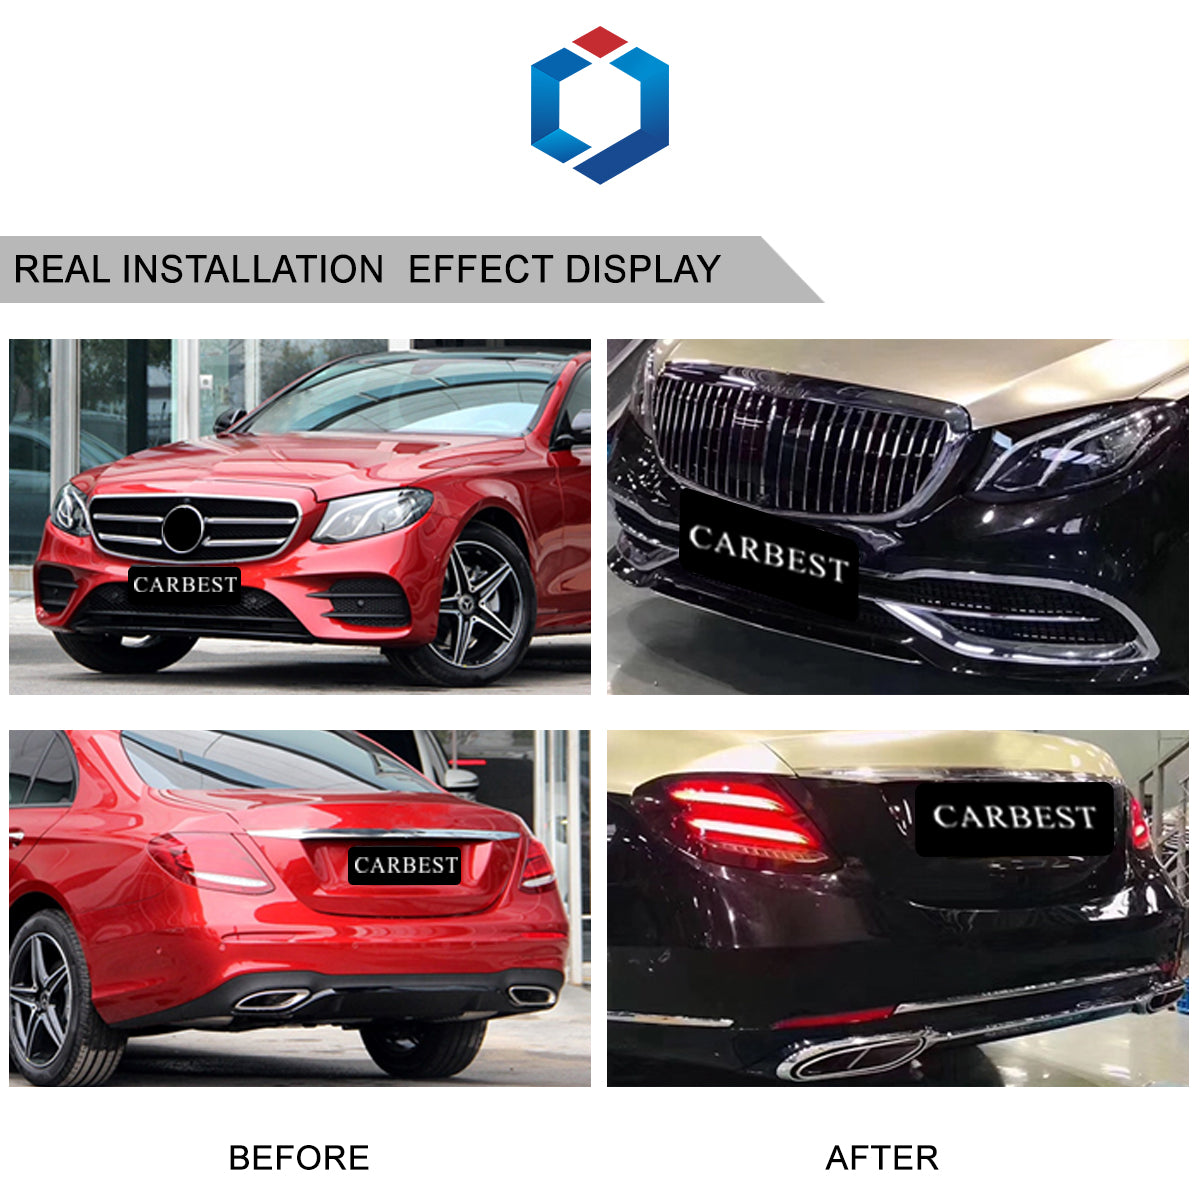 BODY KIT FOR MERCEDES W213 2016-2019 E-CLASS UPGRADE TO W222 MAYBACH STYLE